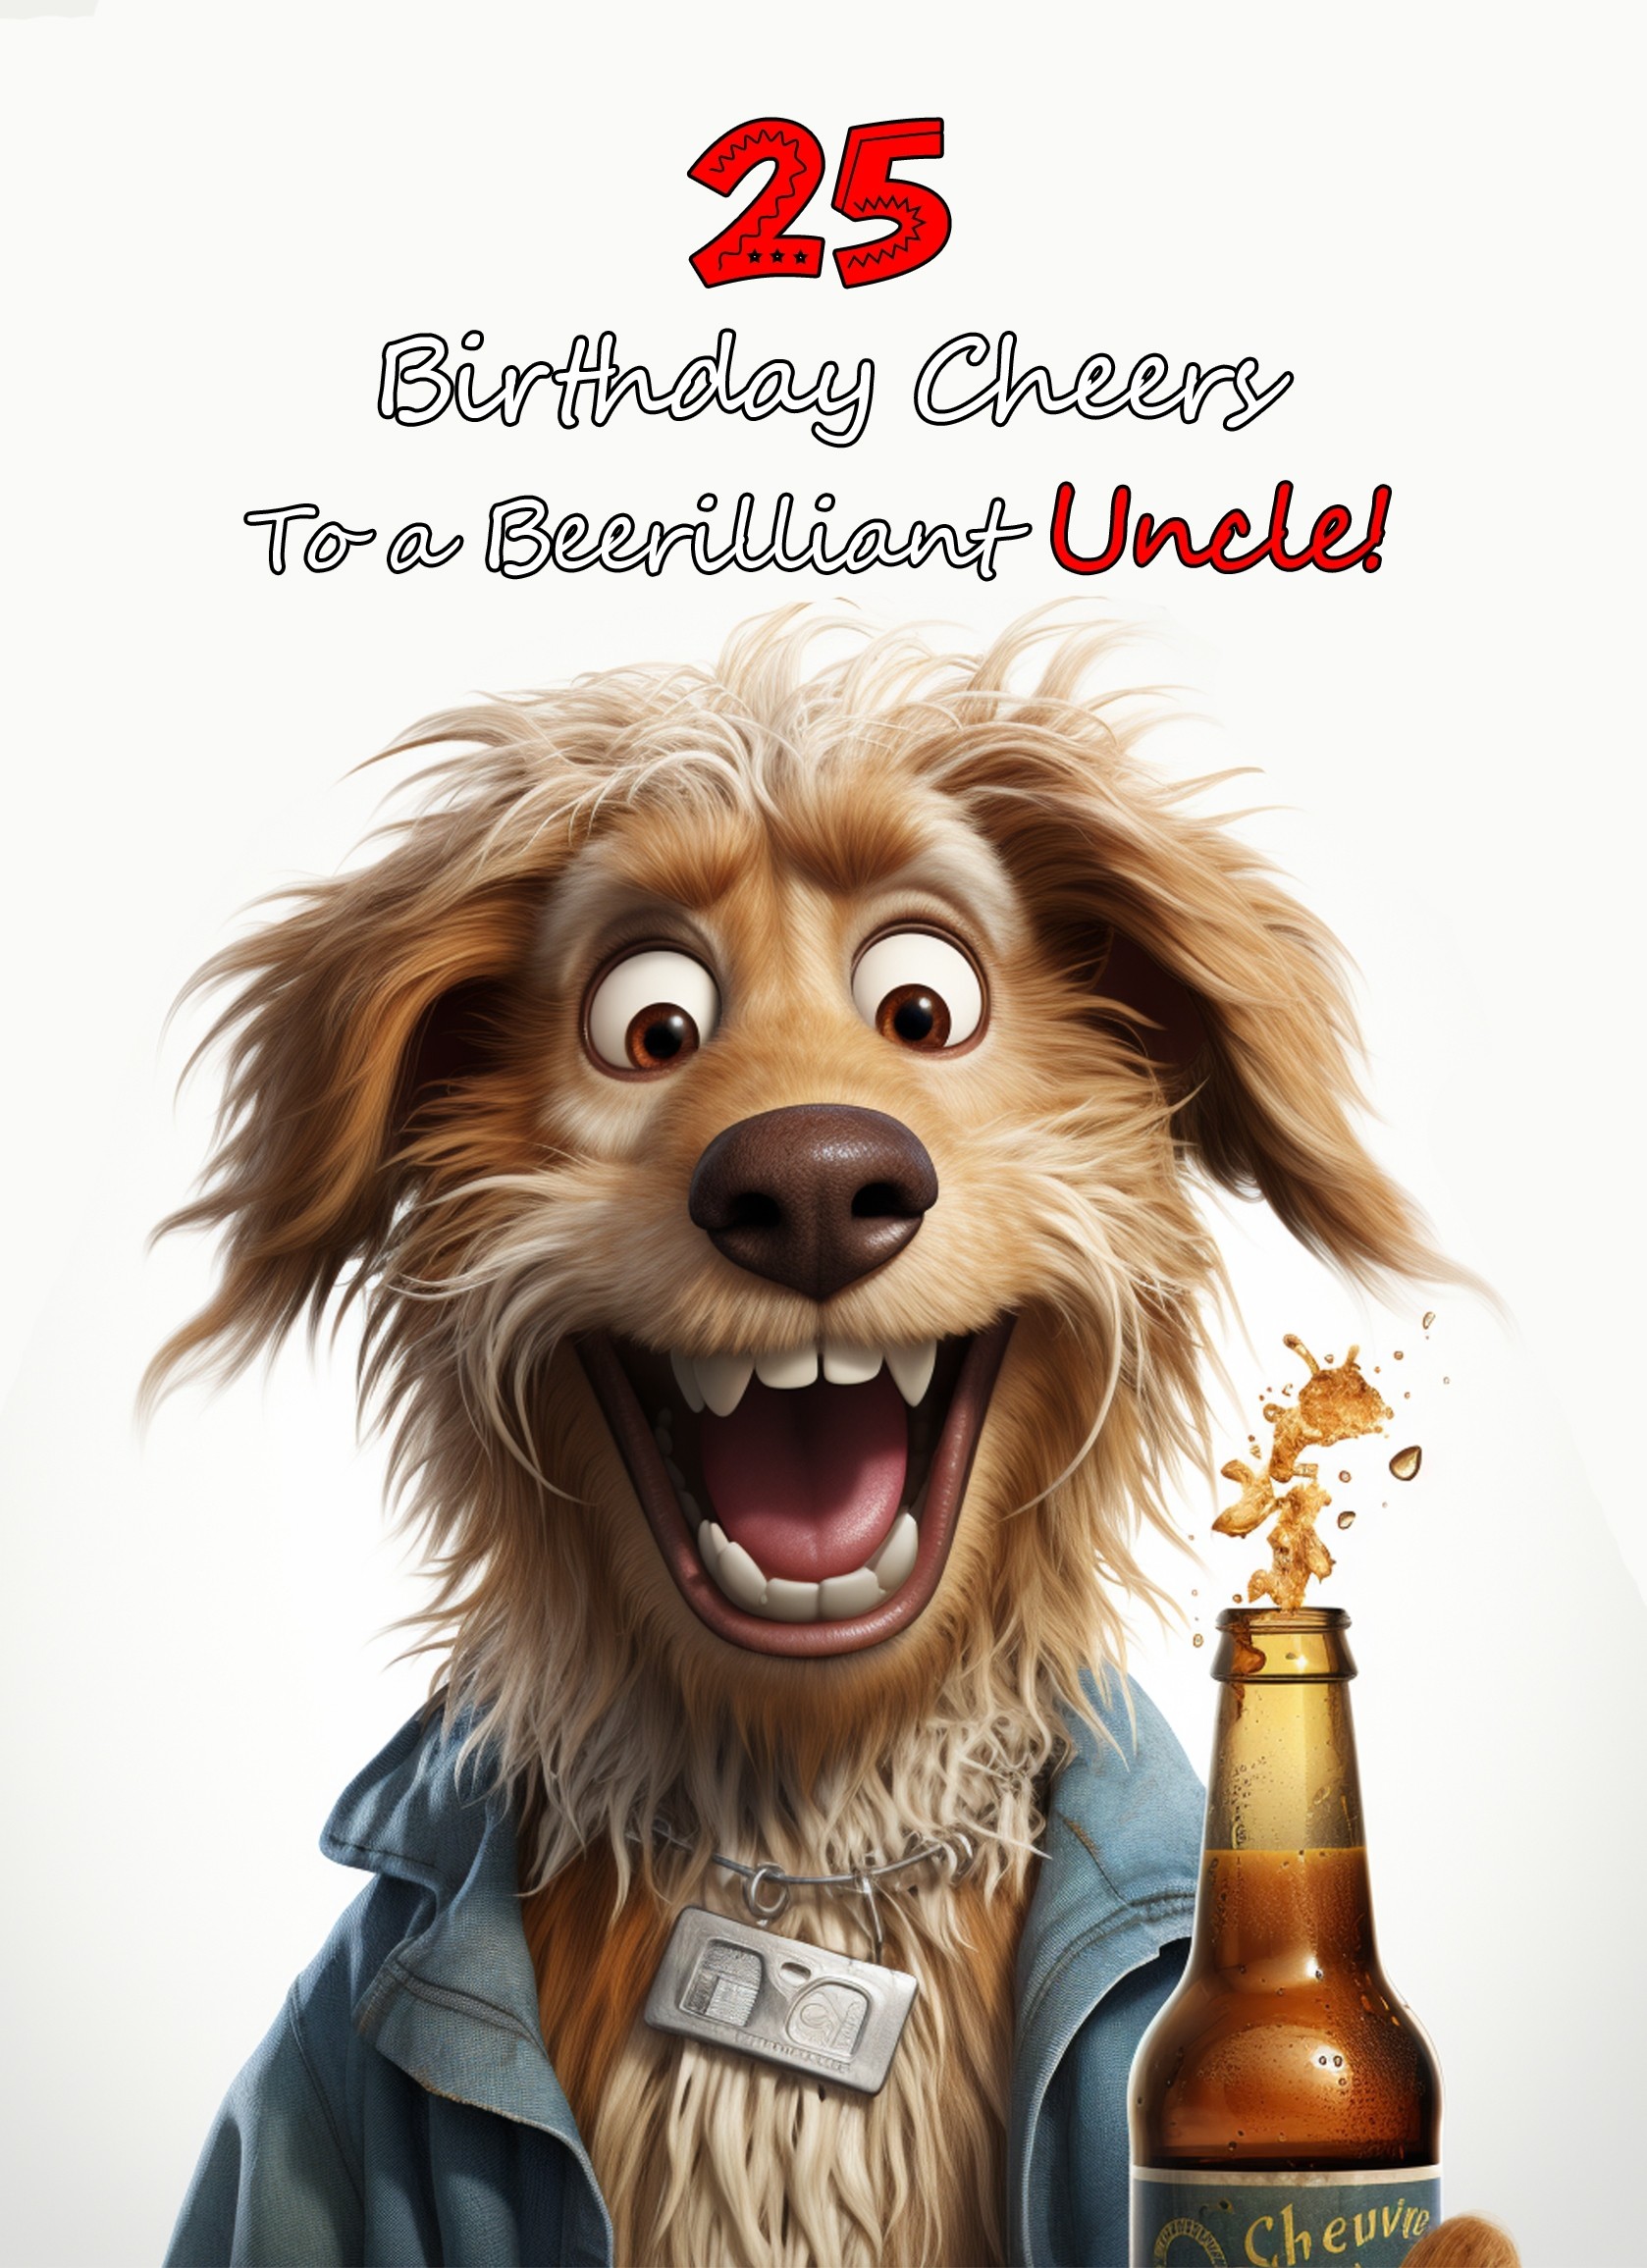 Uncle 25th Birthday Card (Funny Beerilliant Birthday Cheers)